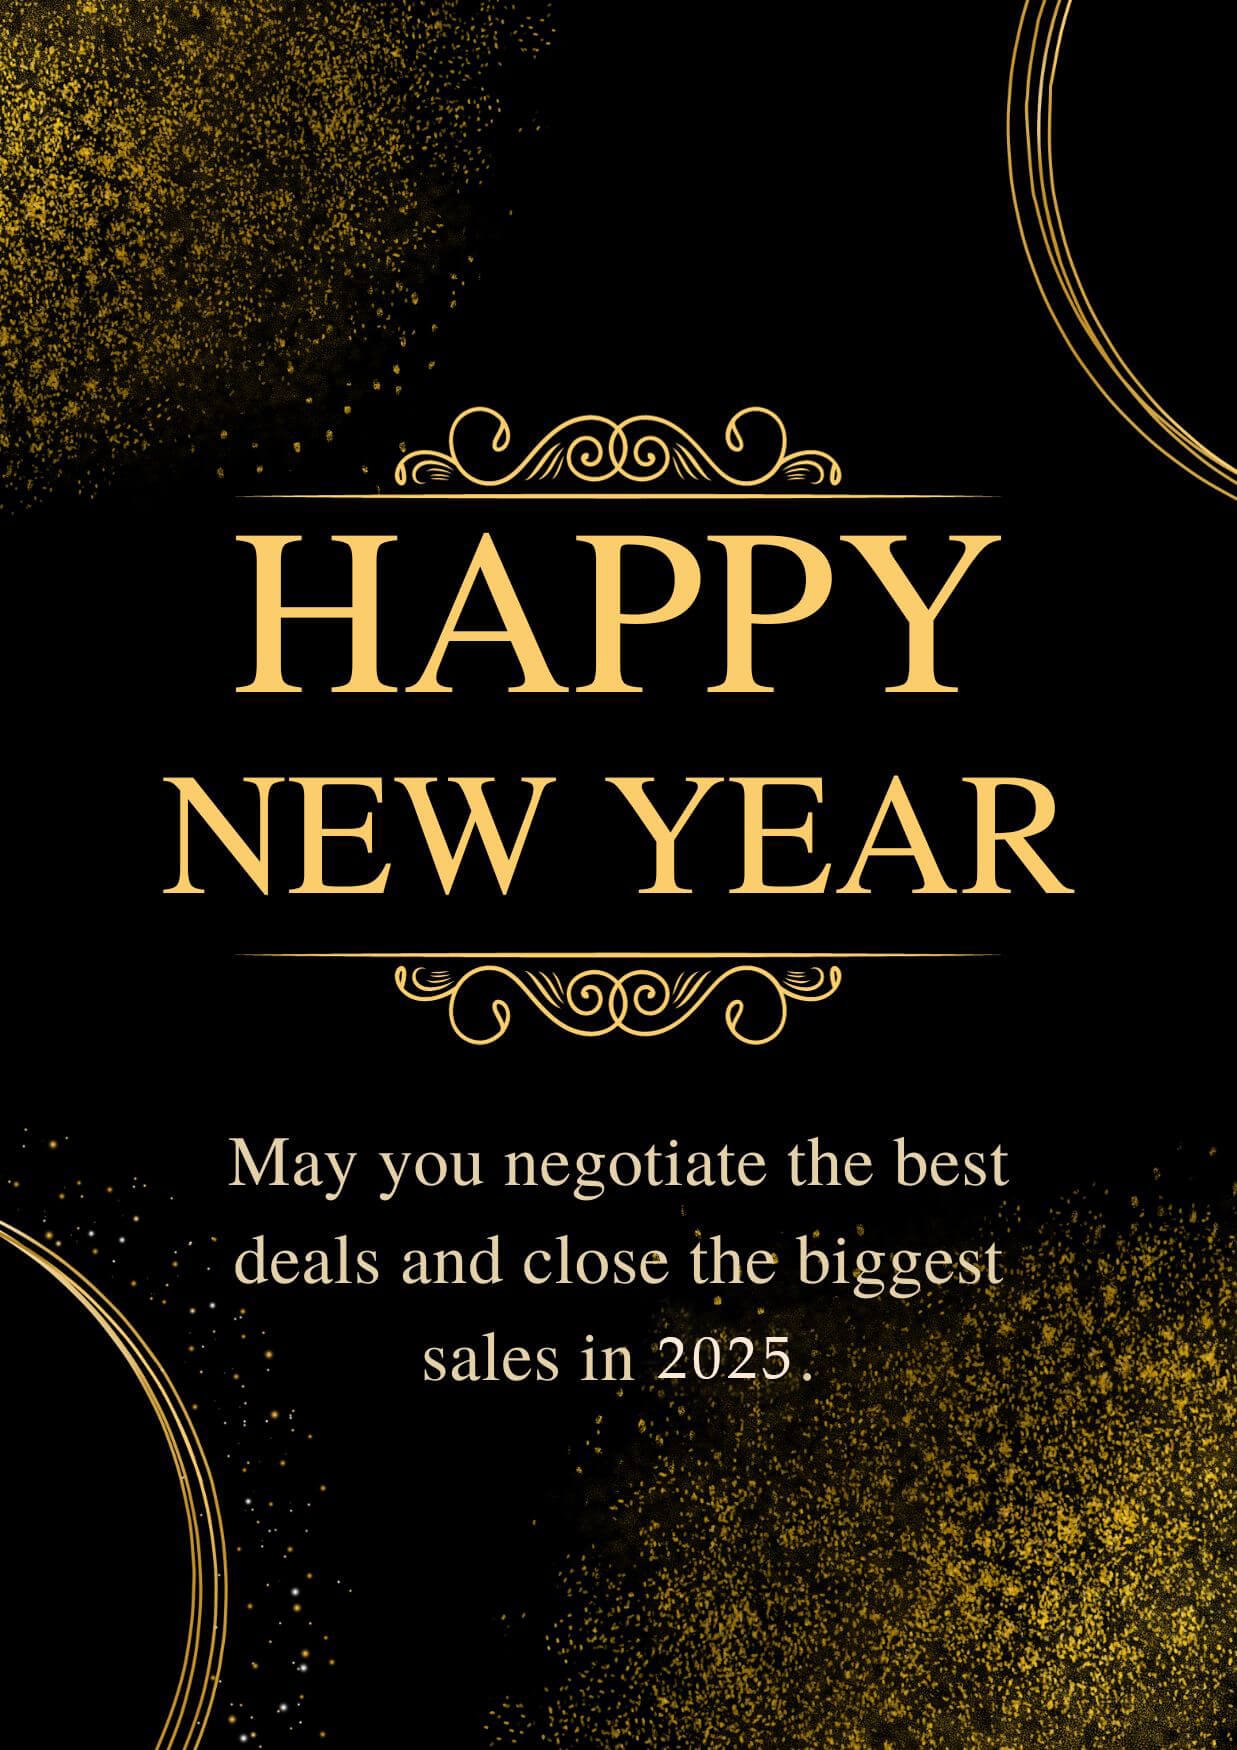 Happy New Year Wishes 2025 For Real Estate